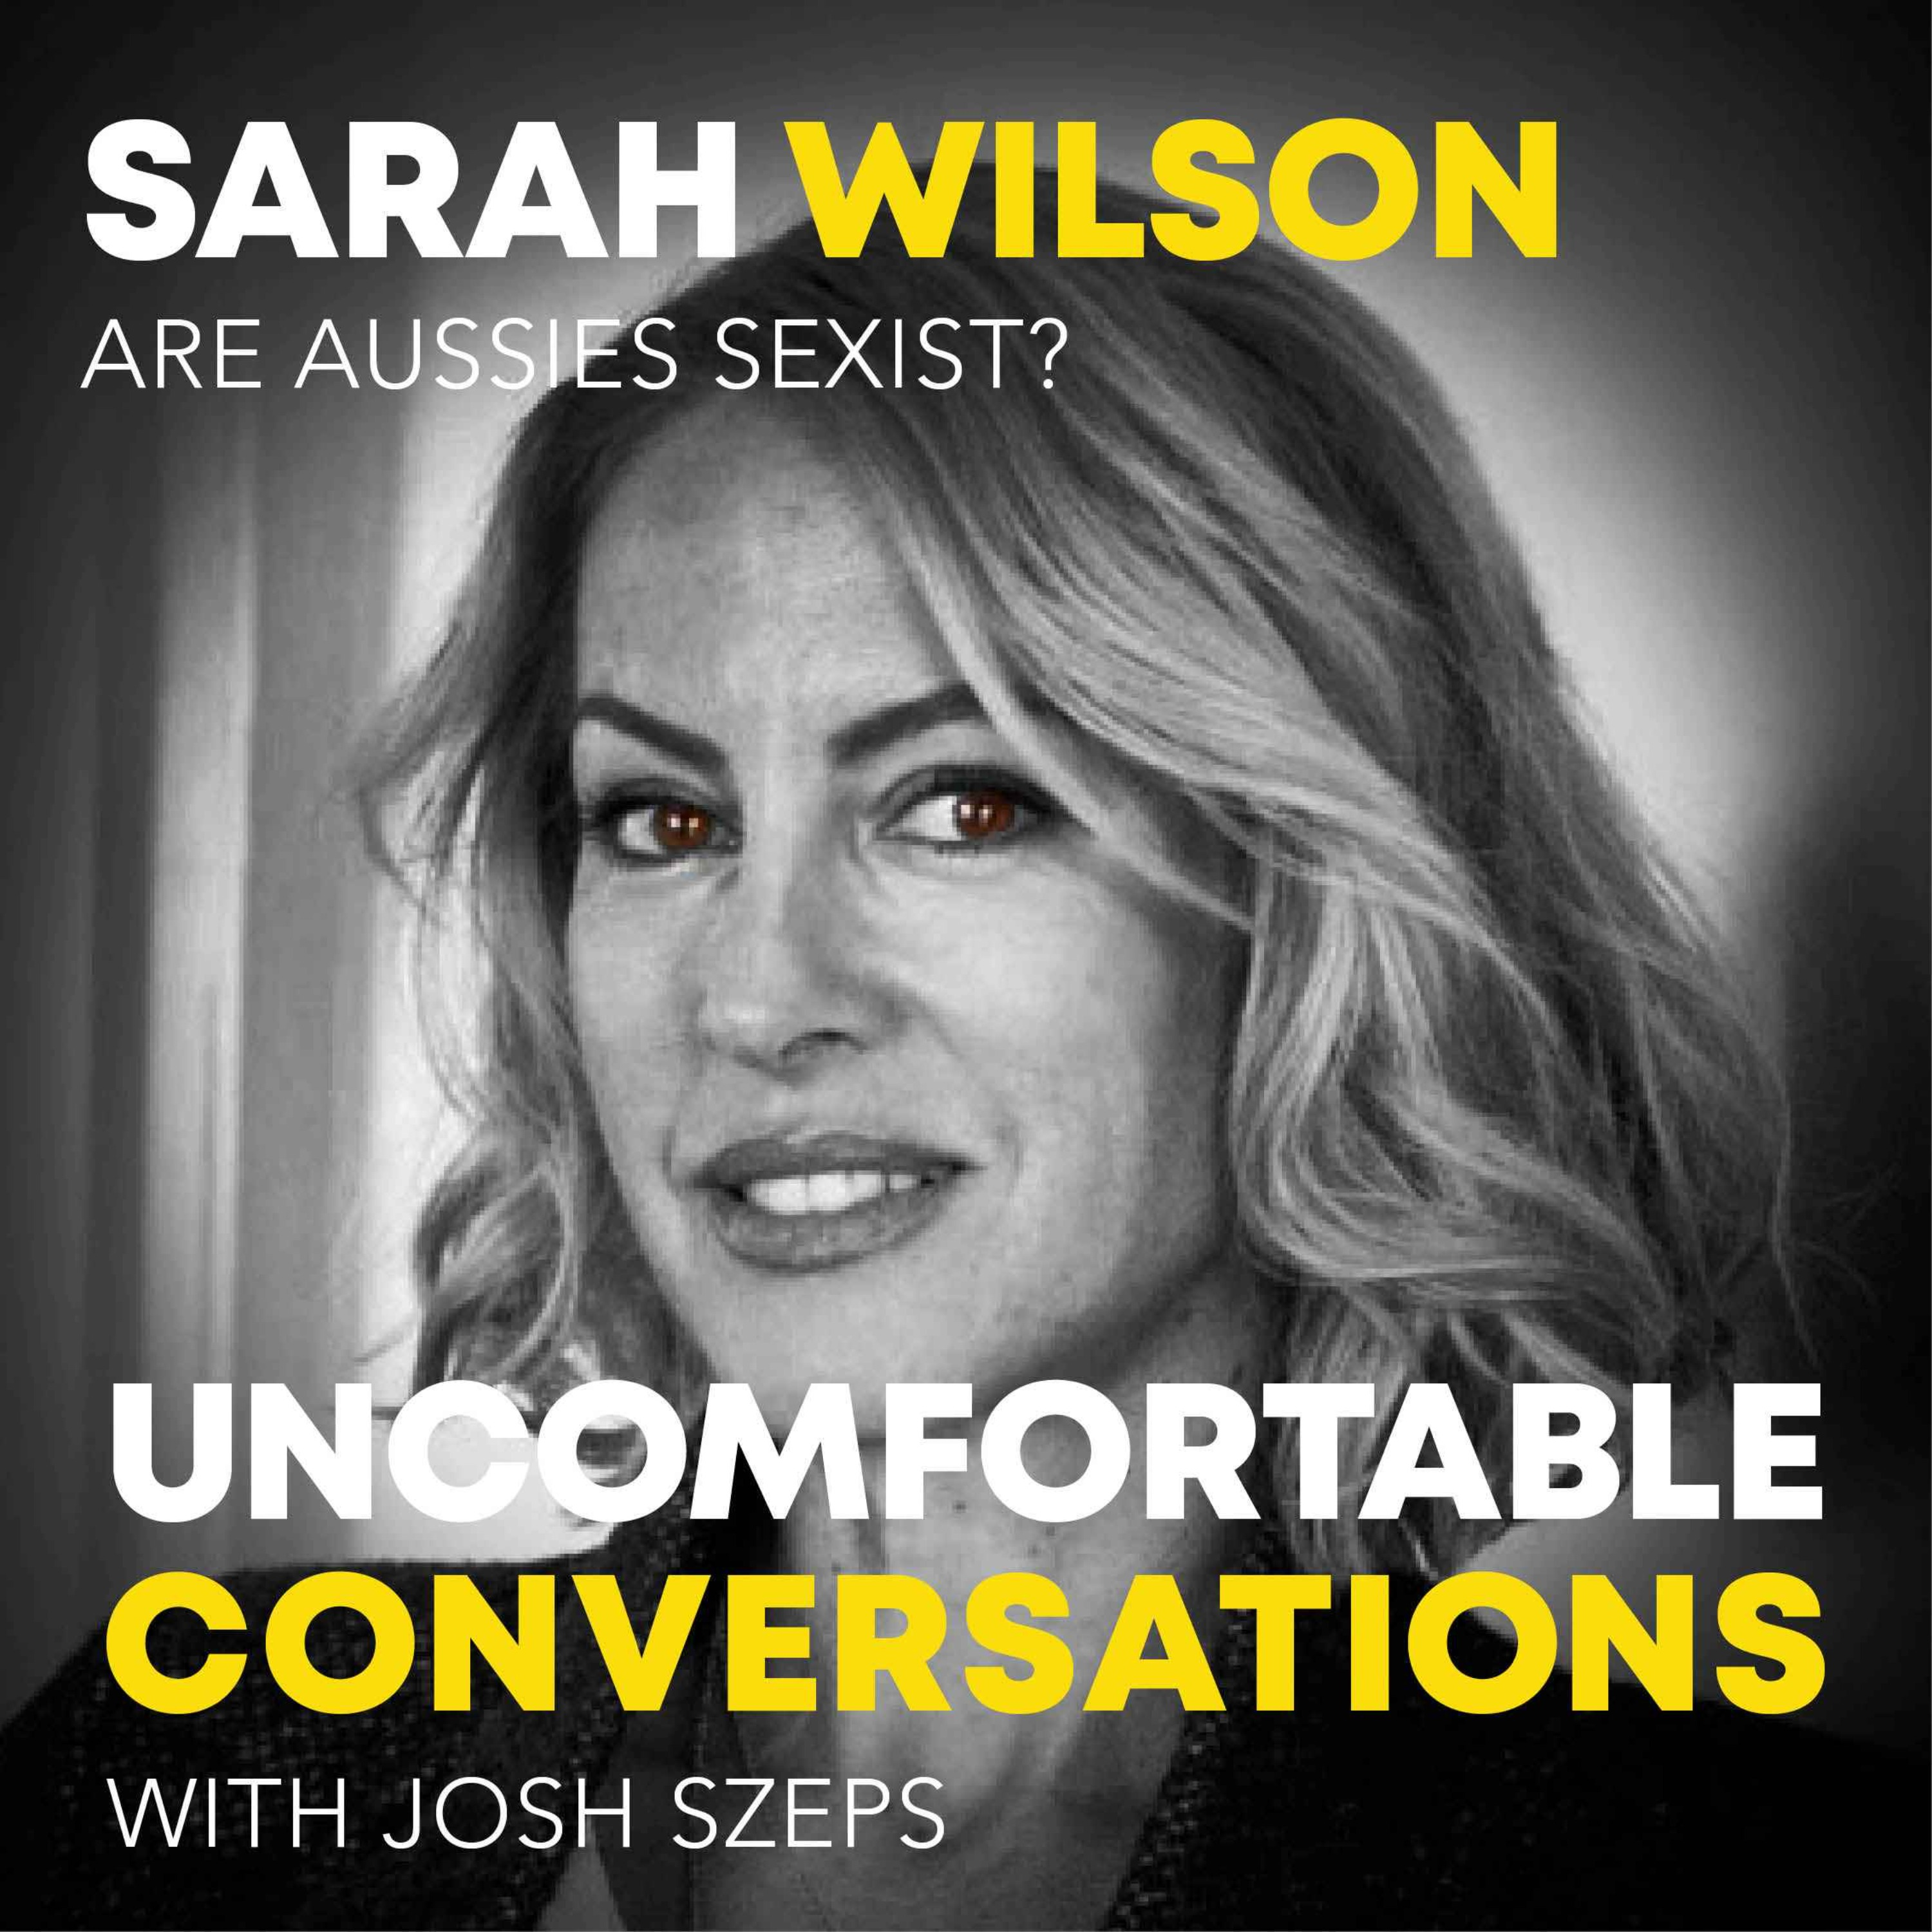 "Are Aussies Sexist?" with Sarah Wilson